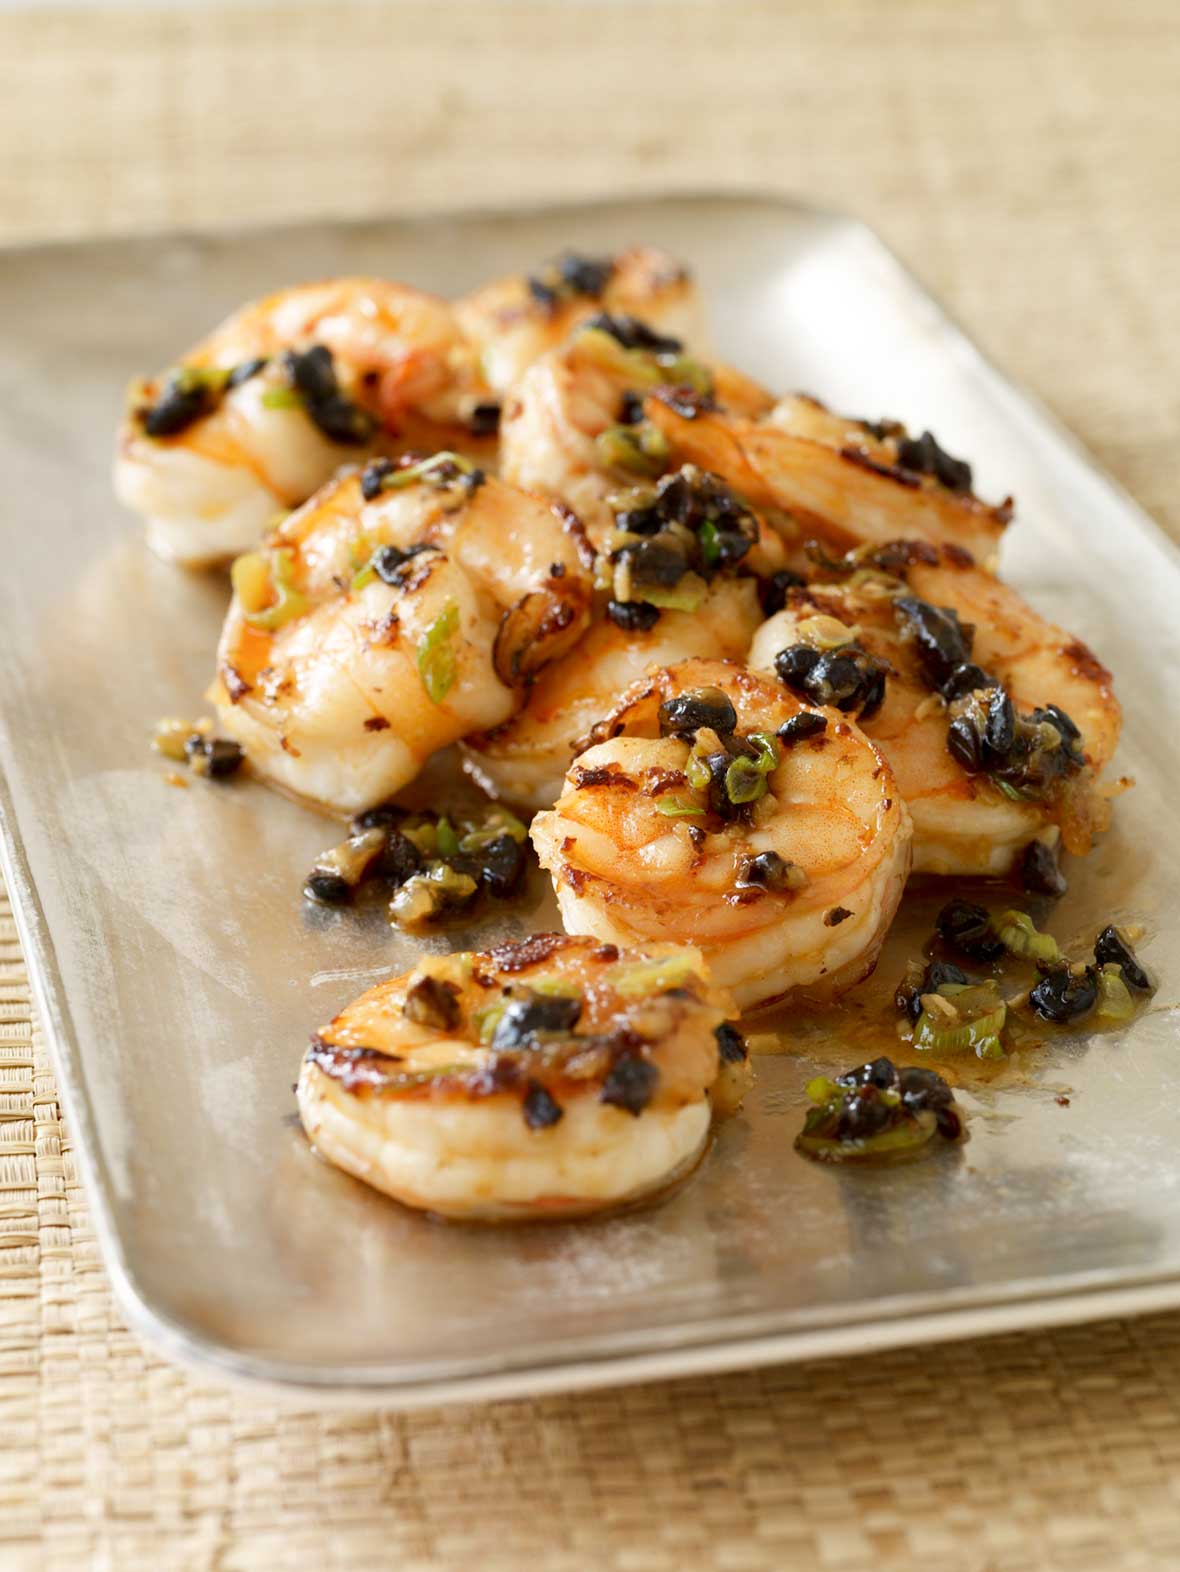 Shrimp with black beans piled on a rectangular metal tray.